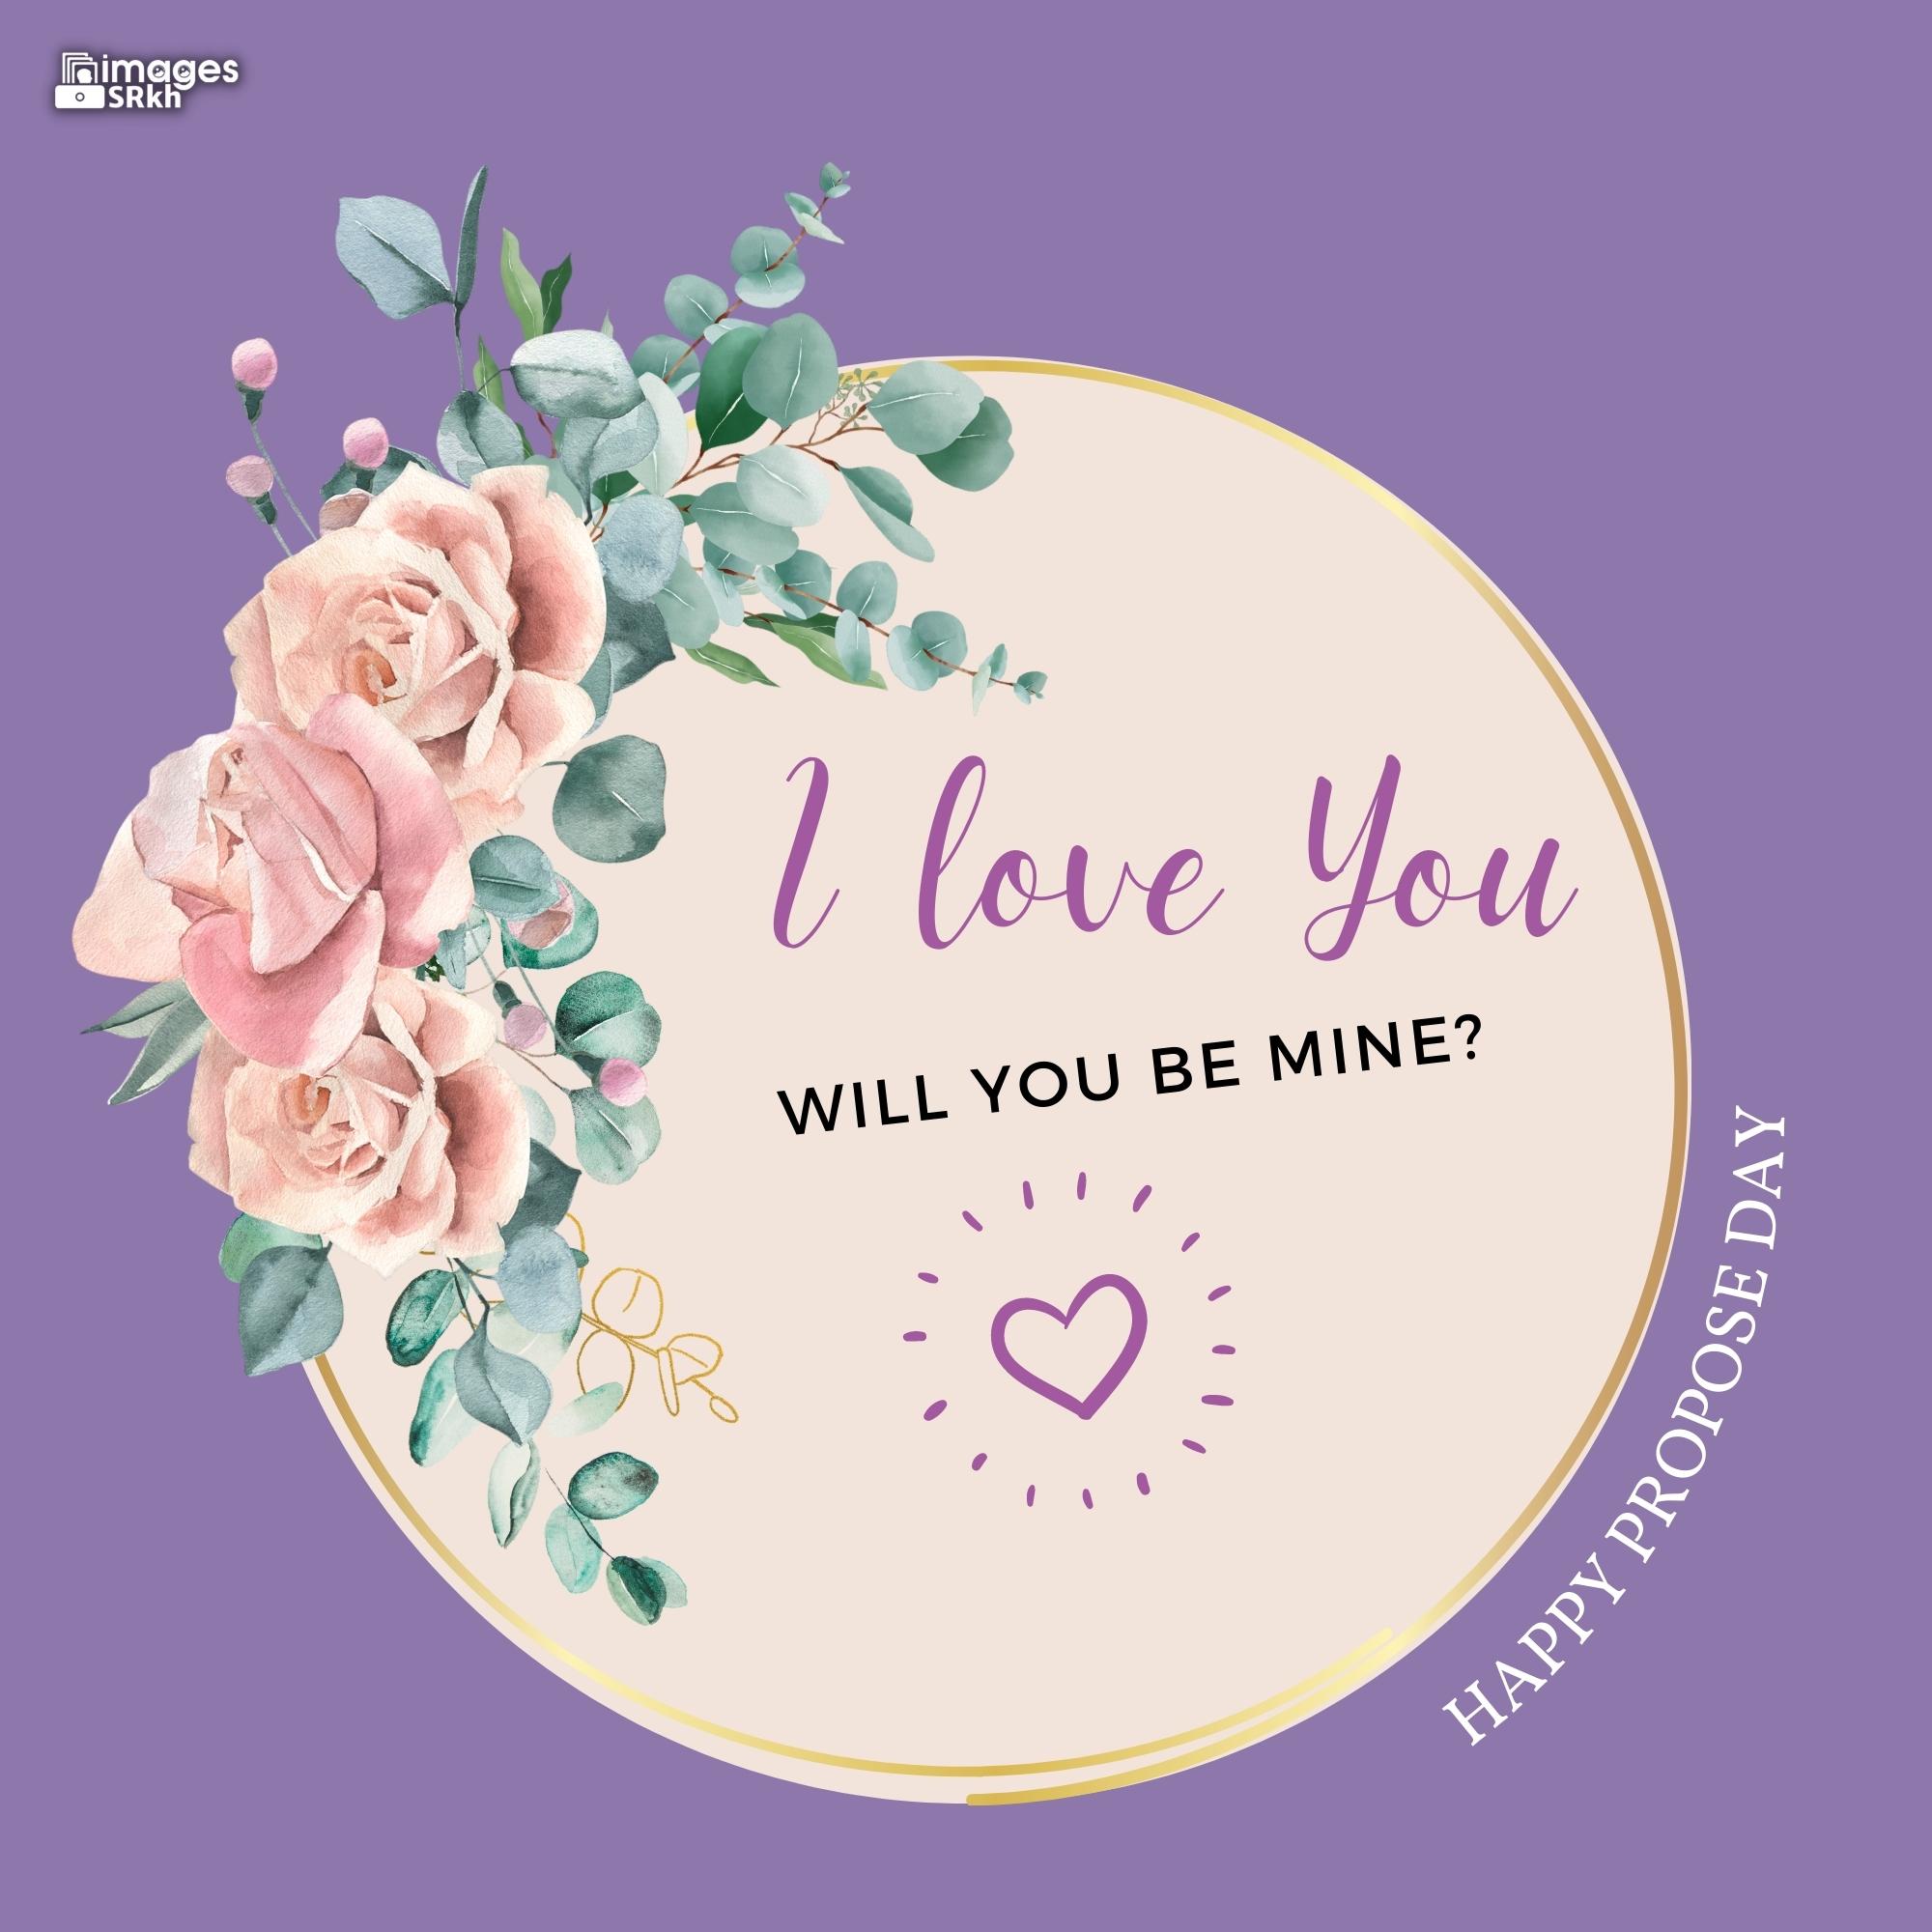 Happy Propose Day Images | 450 | I love you will you be mine